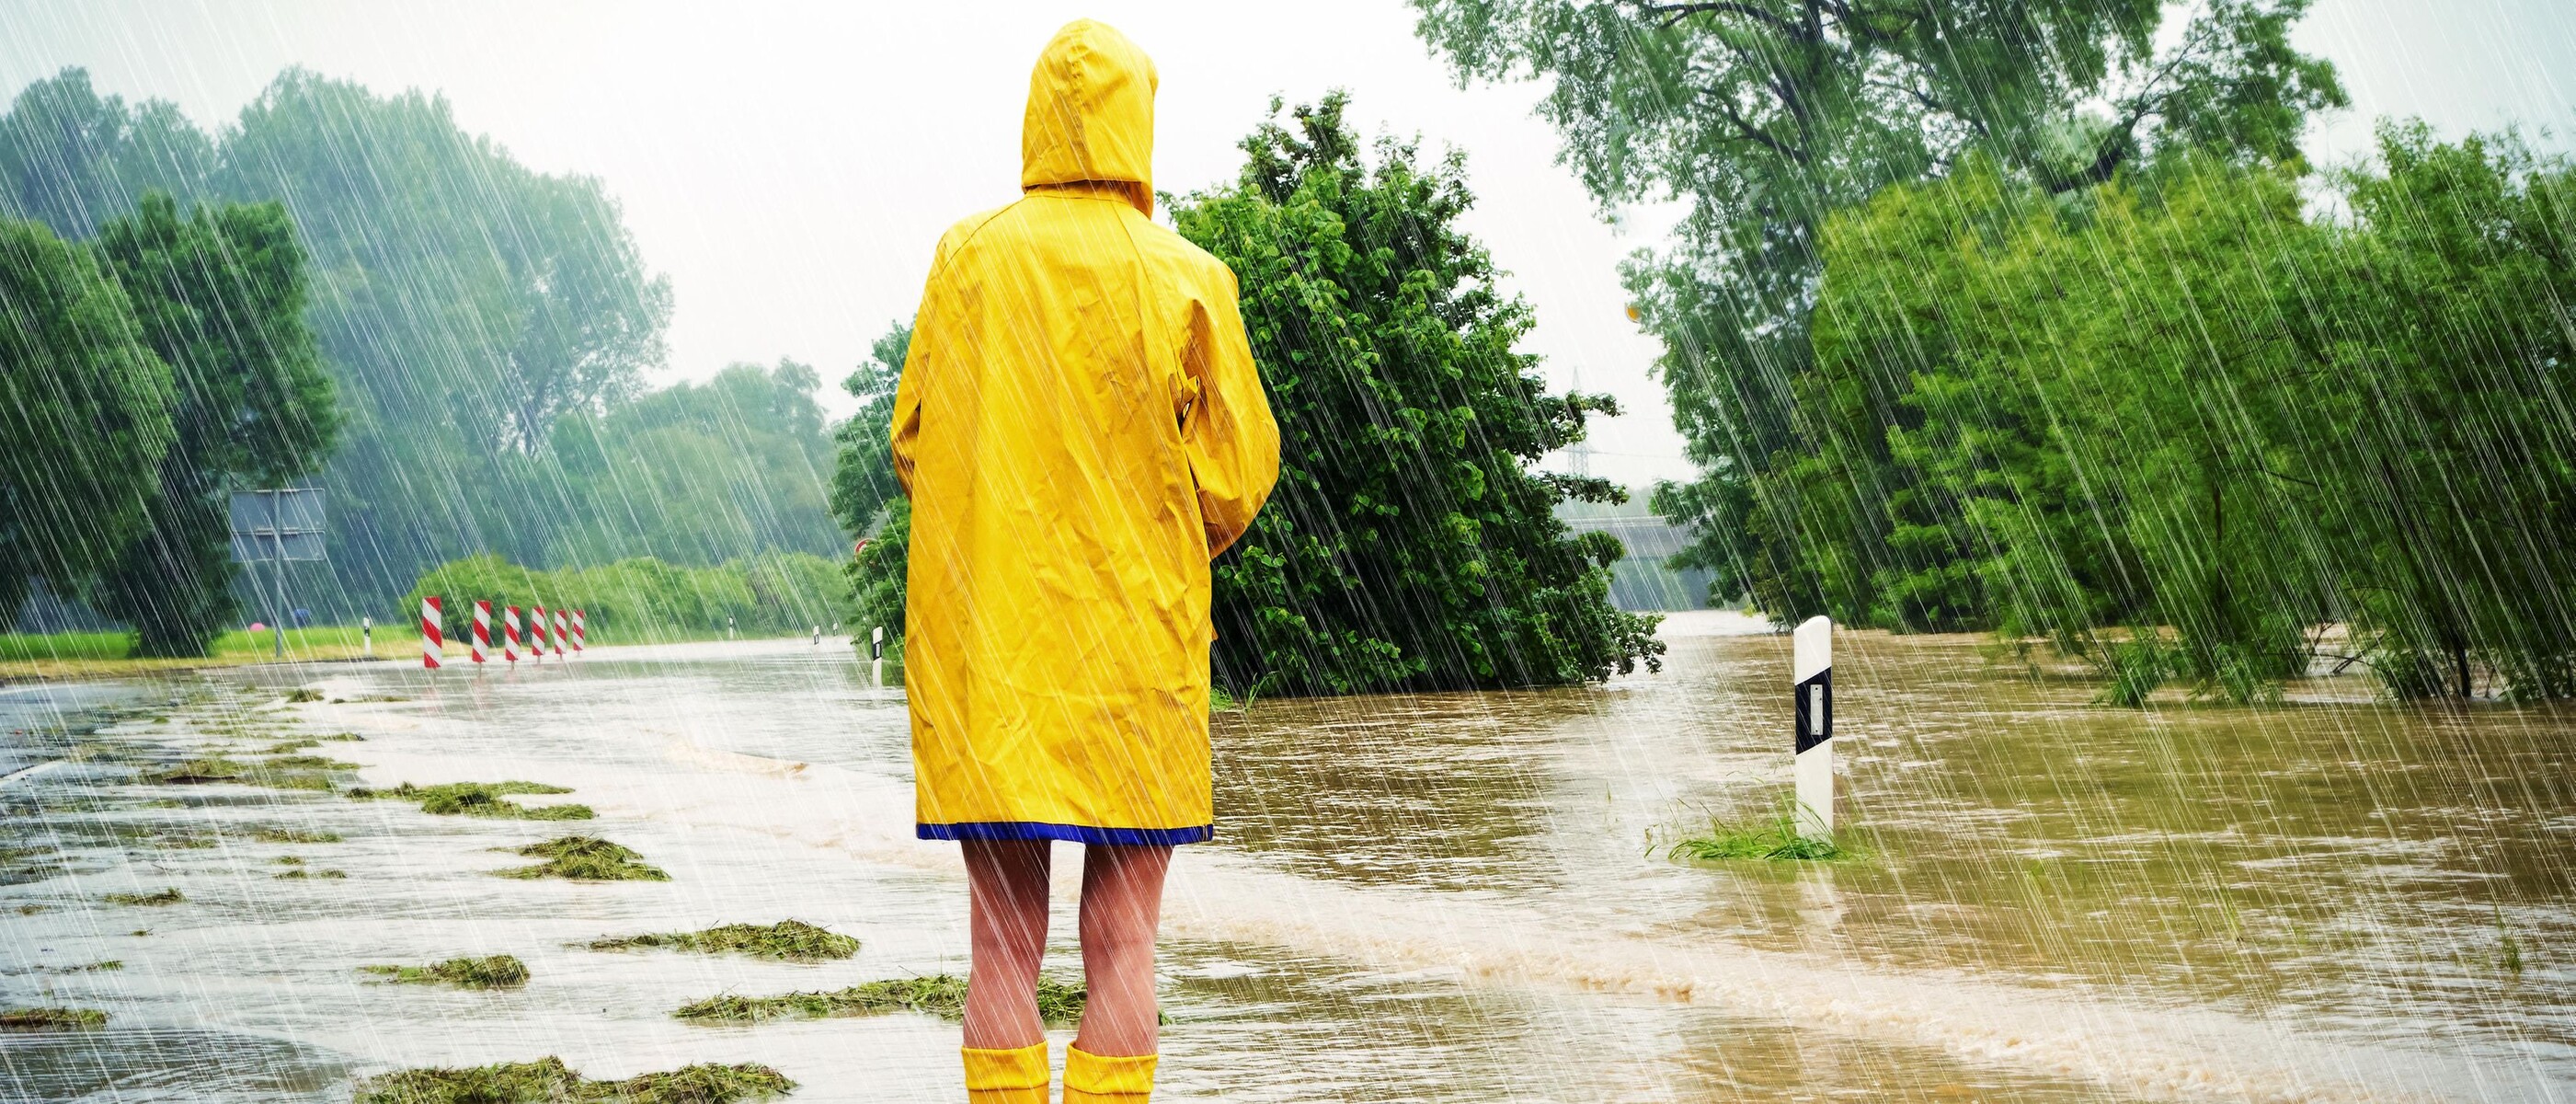 Man in a raincoat on a flooded street